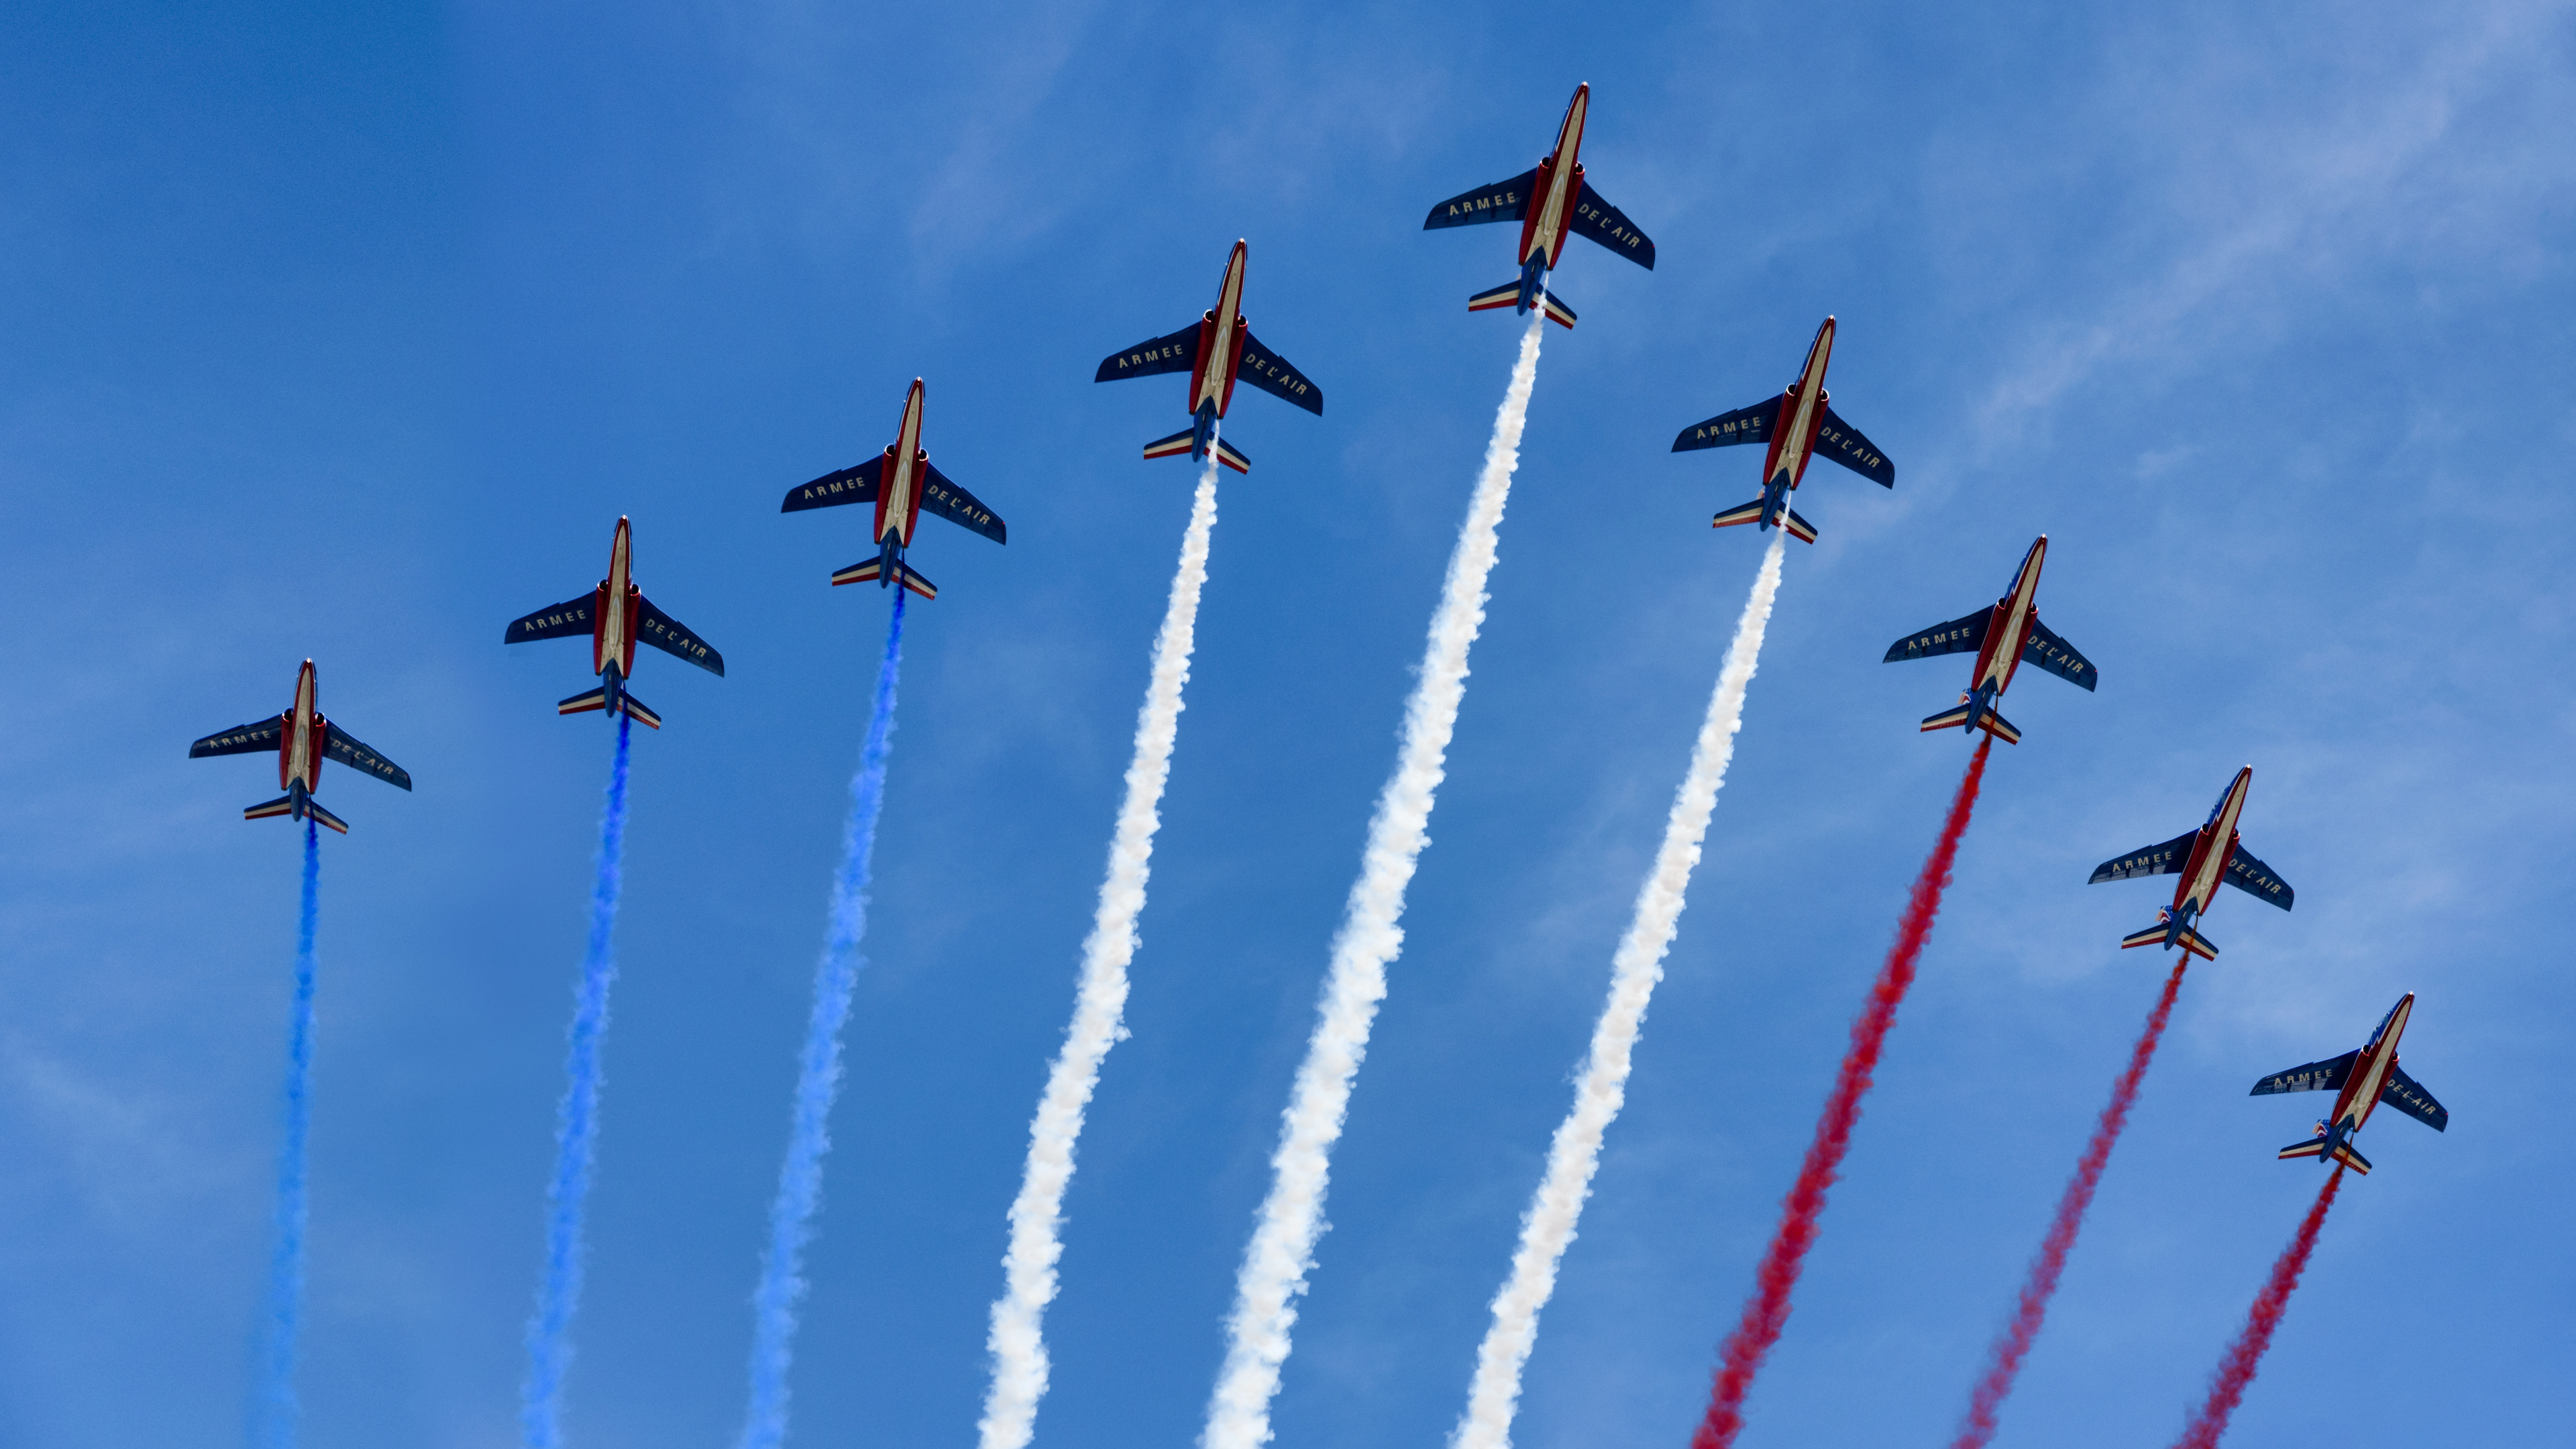 Nine stunt jets flying overhead with blue, white and red smoke.